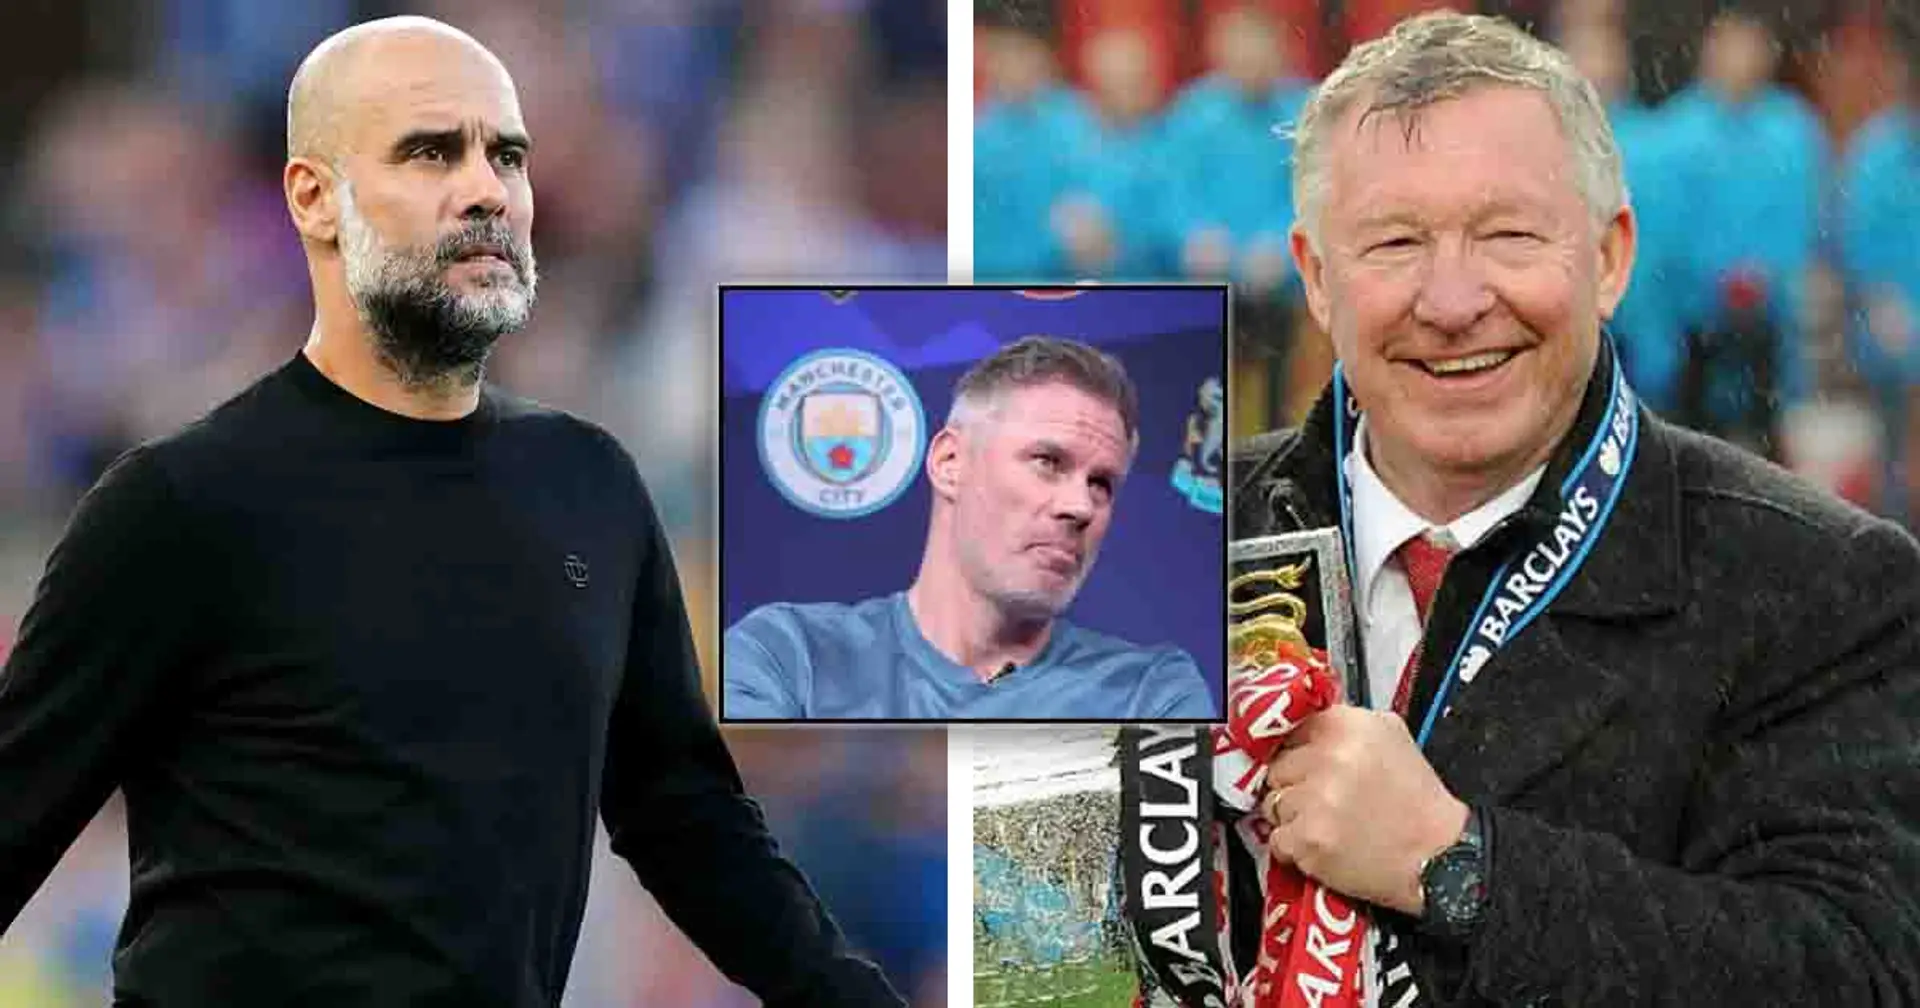 'Pep is never going to do that': Carragher names reason for picking Sir Alex over Guardiola in GOAT manager debate